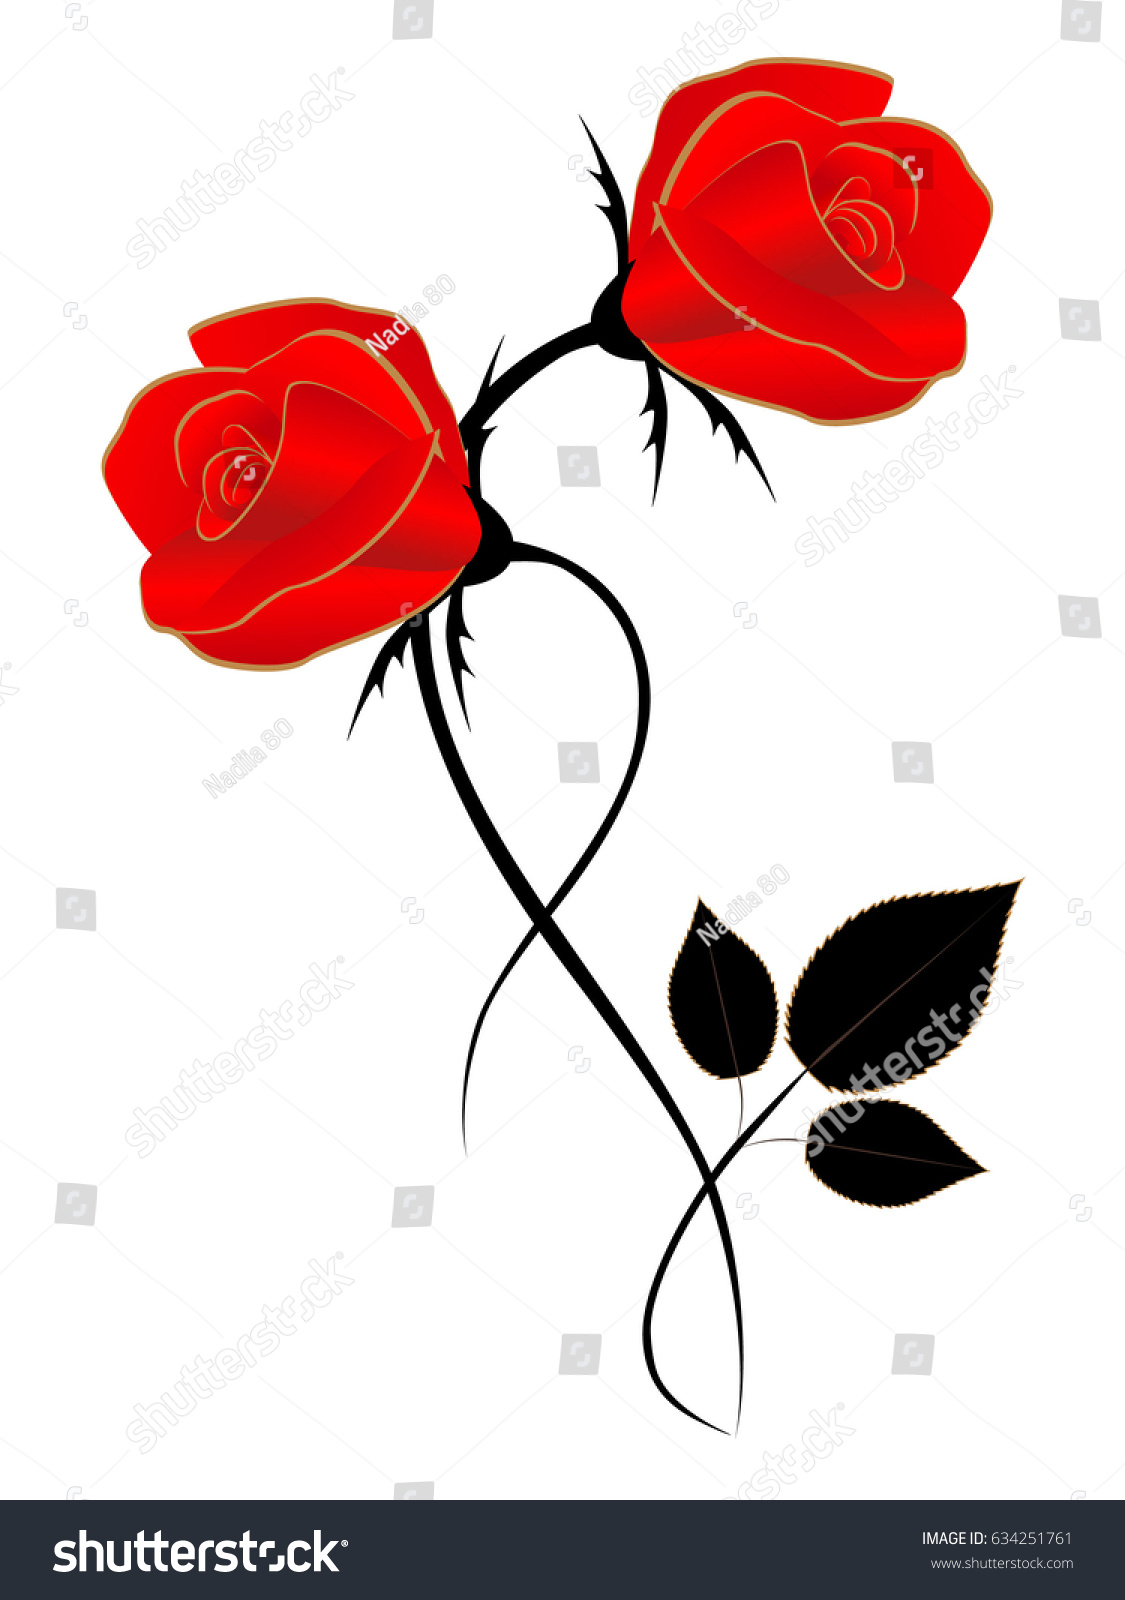 Two Red Roses Element Design Stock Vector Royalty Free 634251761